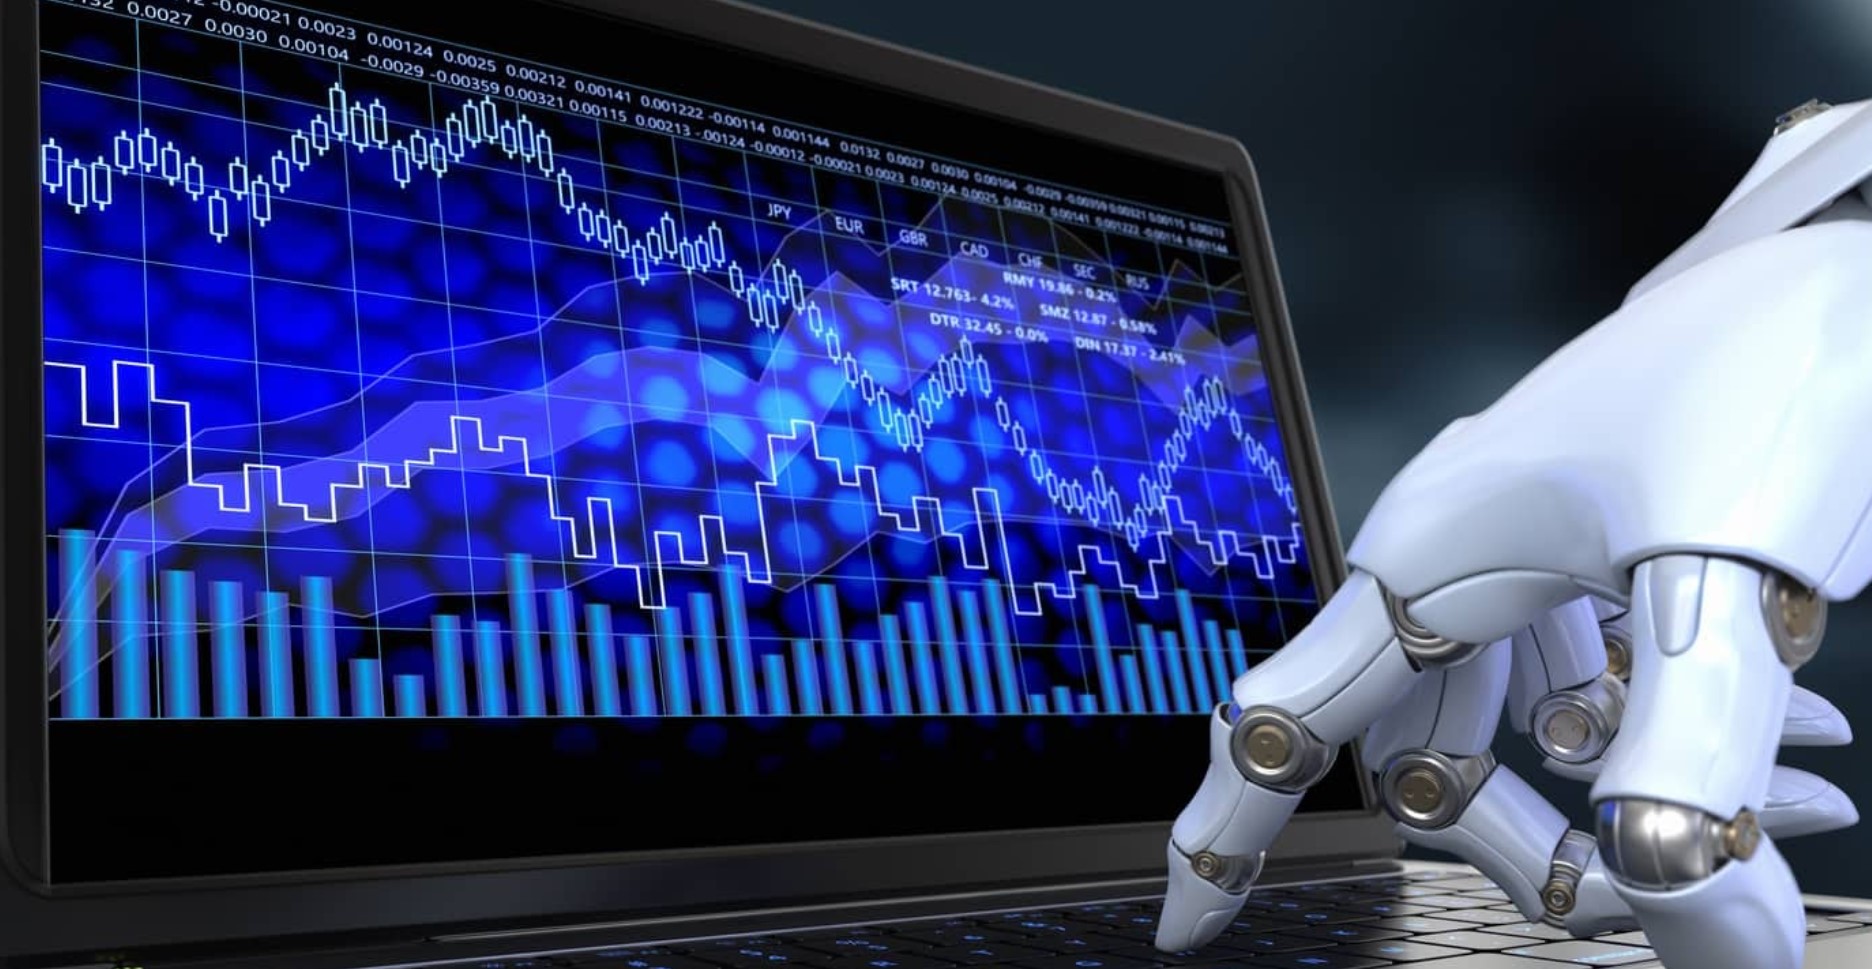 The Pros and Cons of Automated Forex Trading